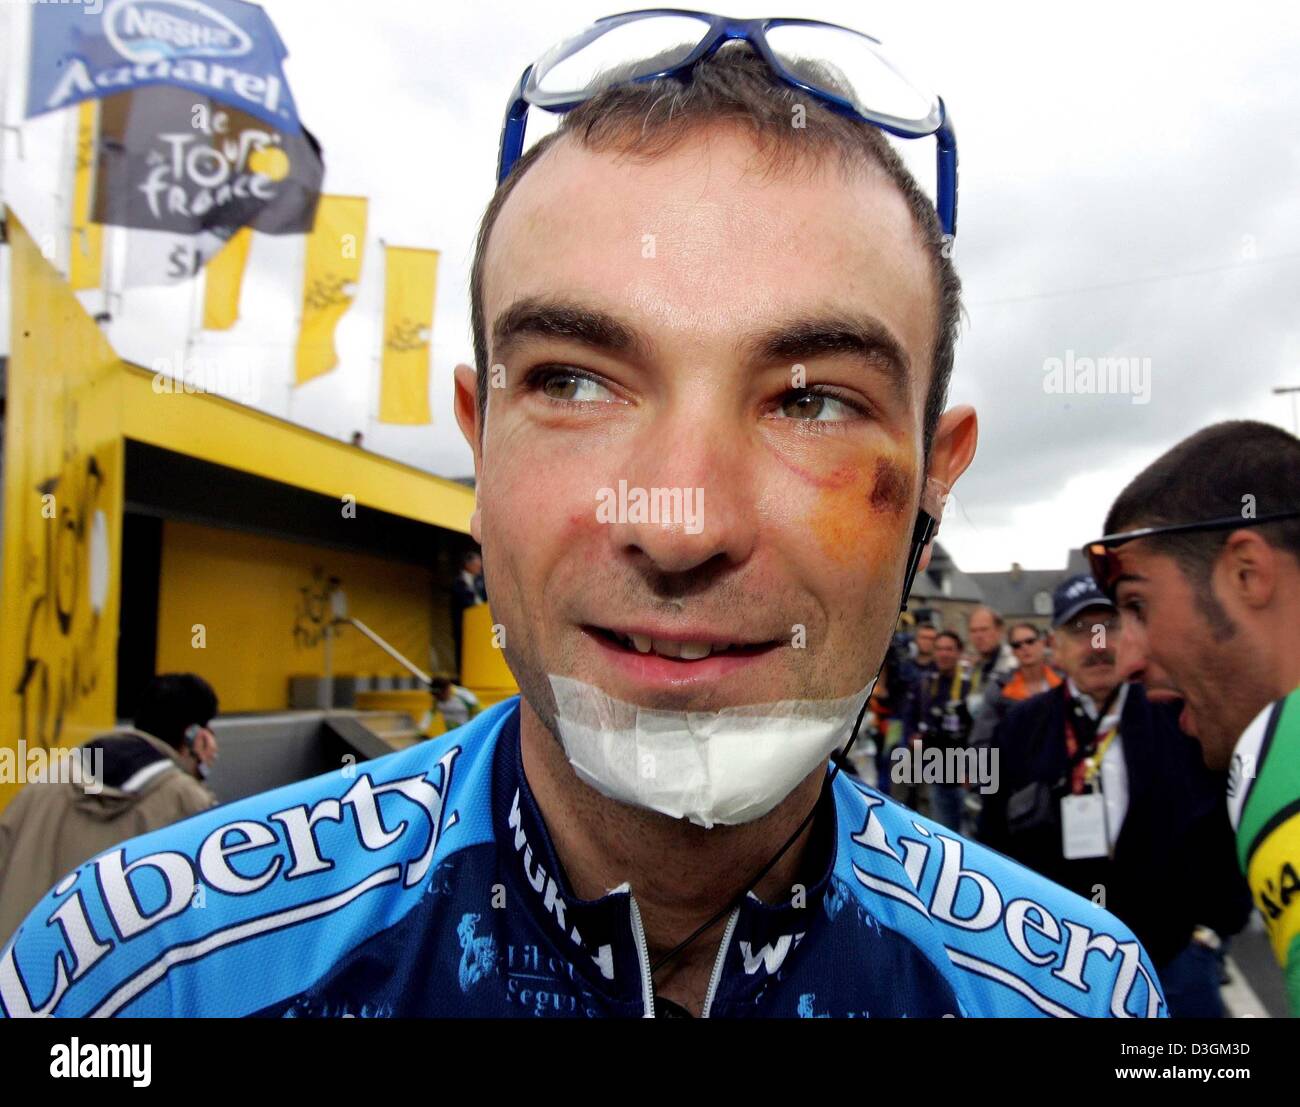 (dpa) - Spanish cyclist Angel Vicioso of Team Liberty Seguros smiles with a bruised face prior to the start of the eighth stage of the Tour de France in Lamballe, France, 11 July 2004. Vicioso suffered several bruises from his falls during the previous stages of the tour. The eighth stage covered a distance of 168km from Lamballe to Quimper. Stock Photo